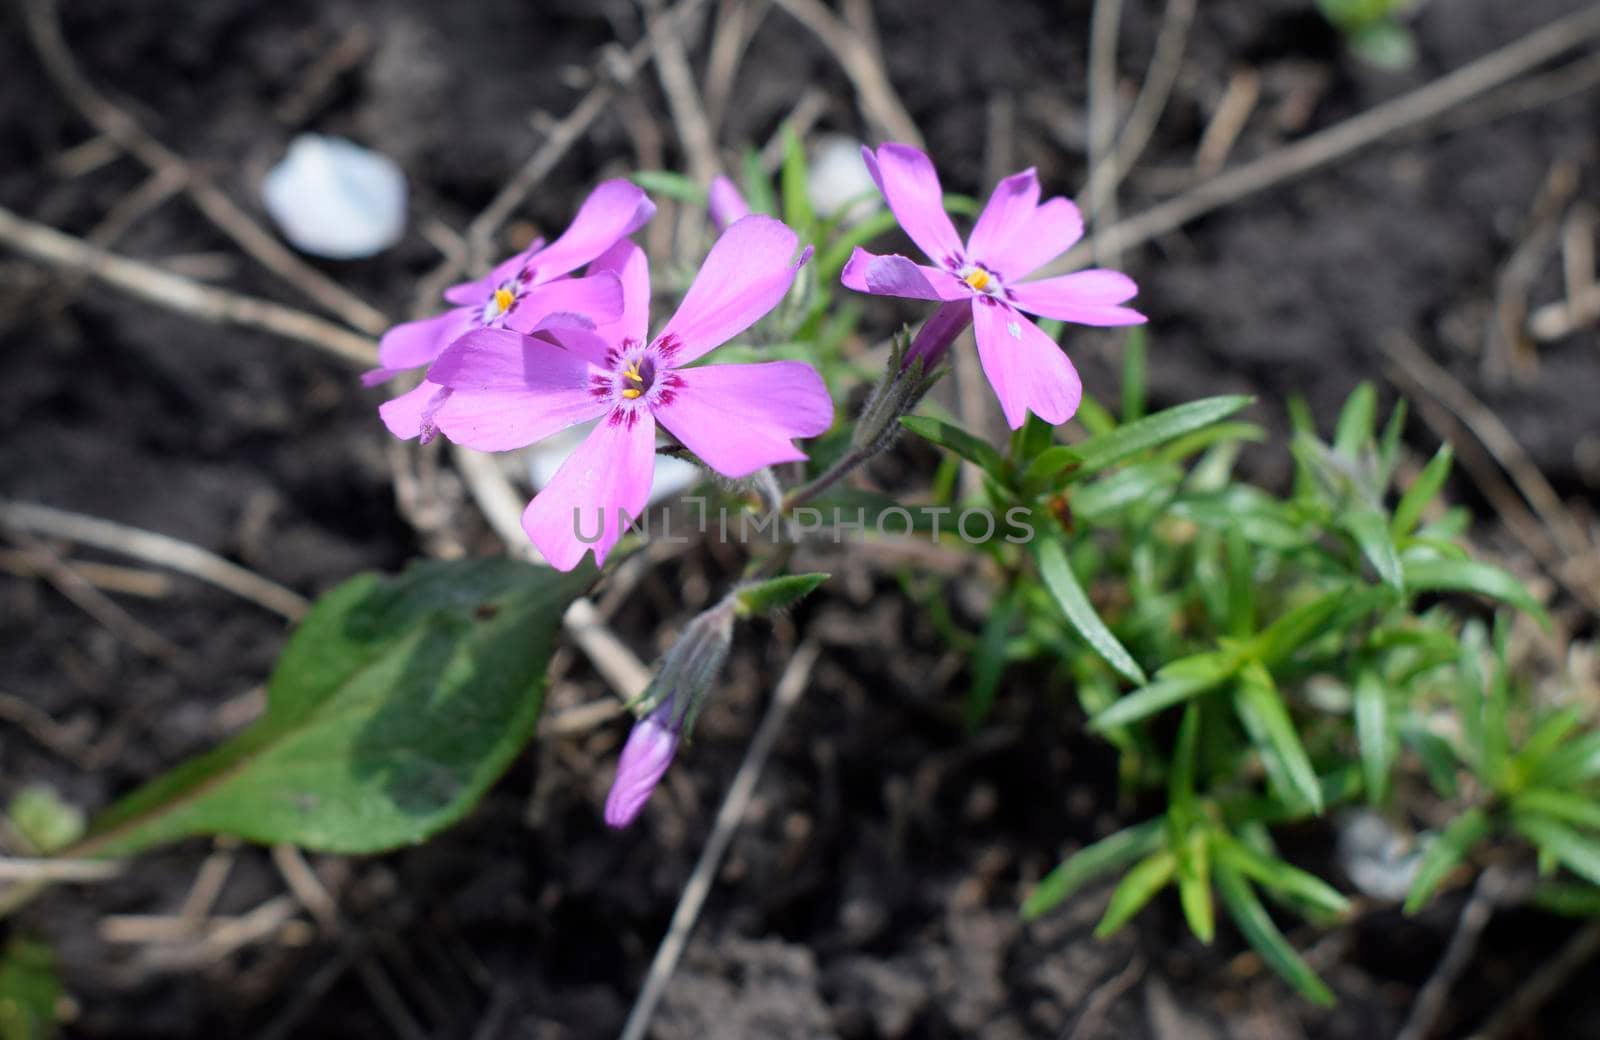 Styloid phlox. Small bright violet spring flowers in the garden close up. Spring background.